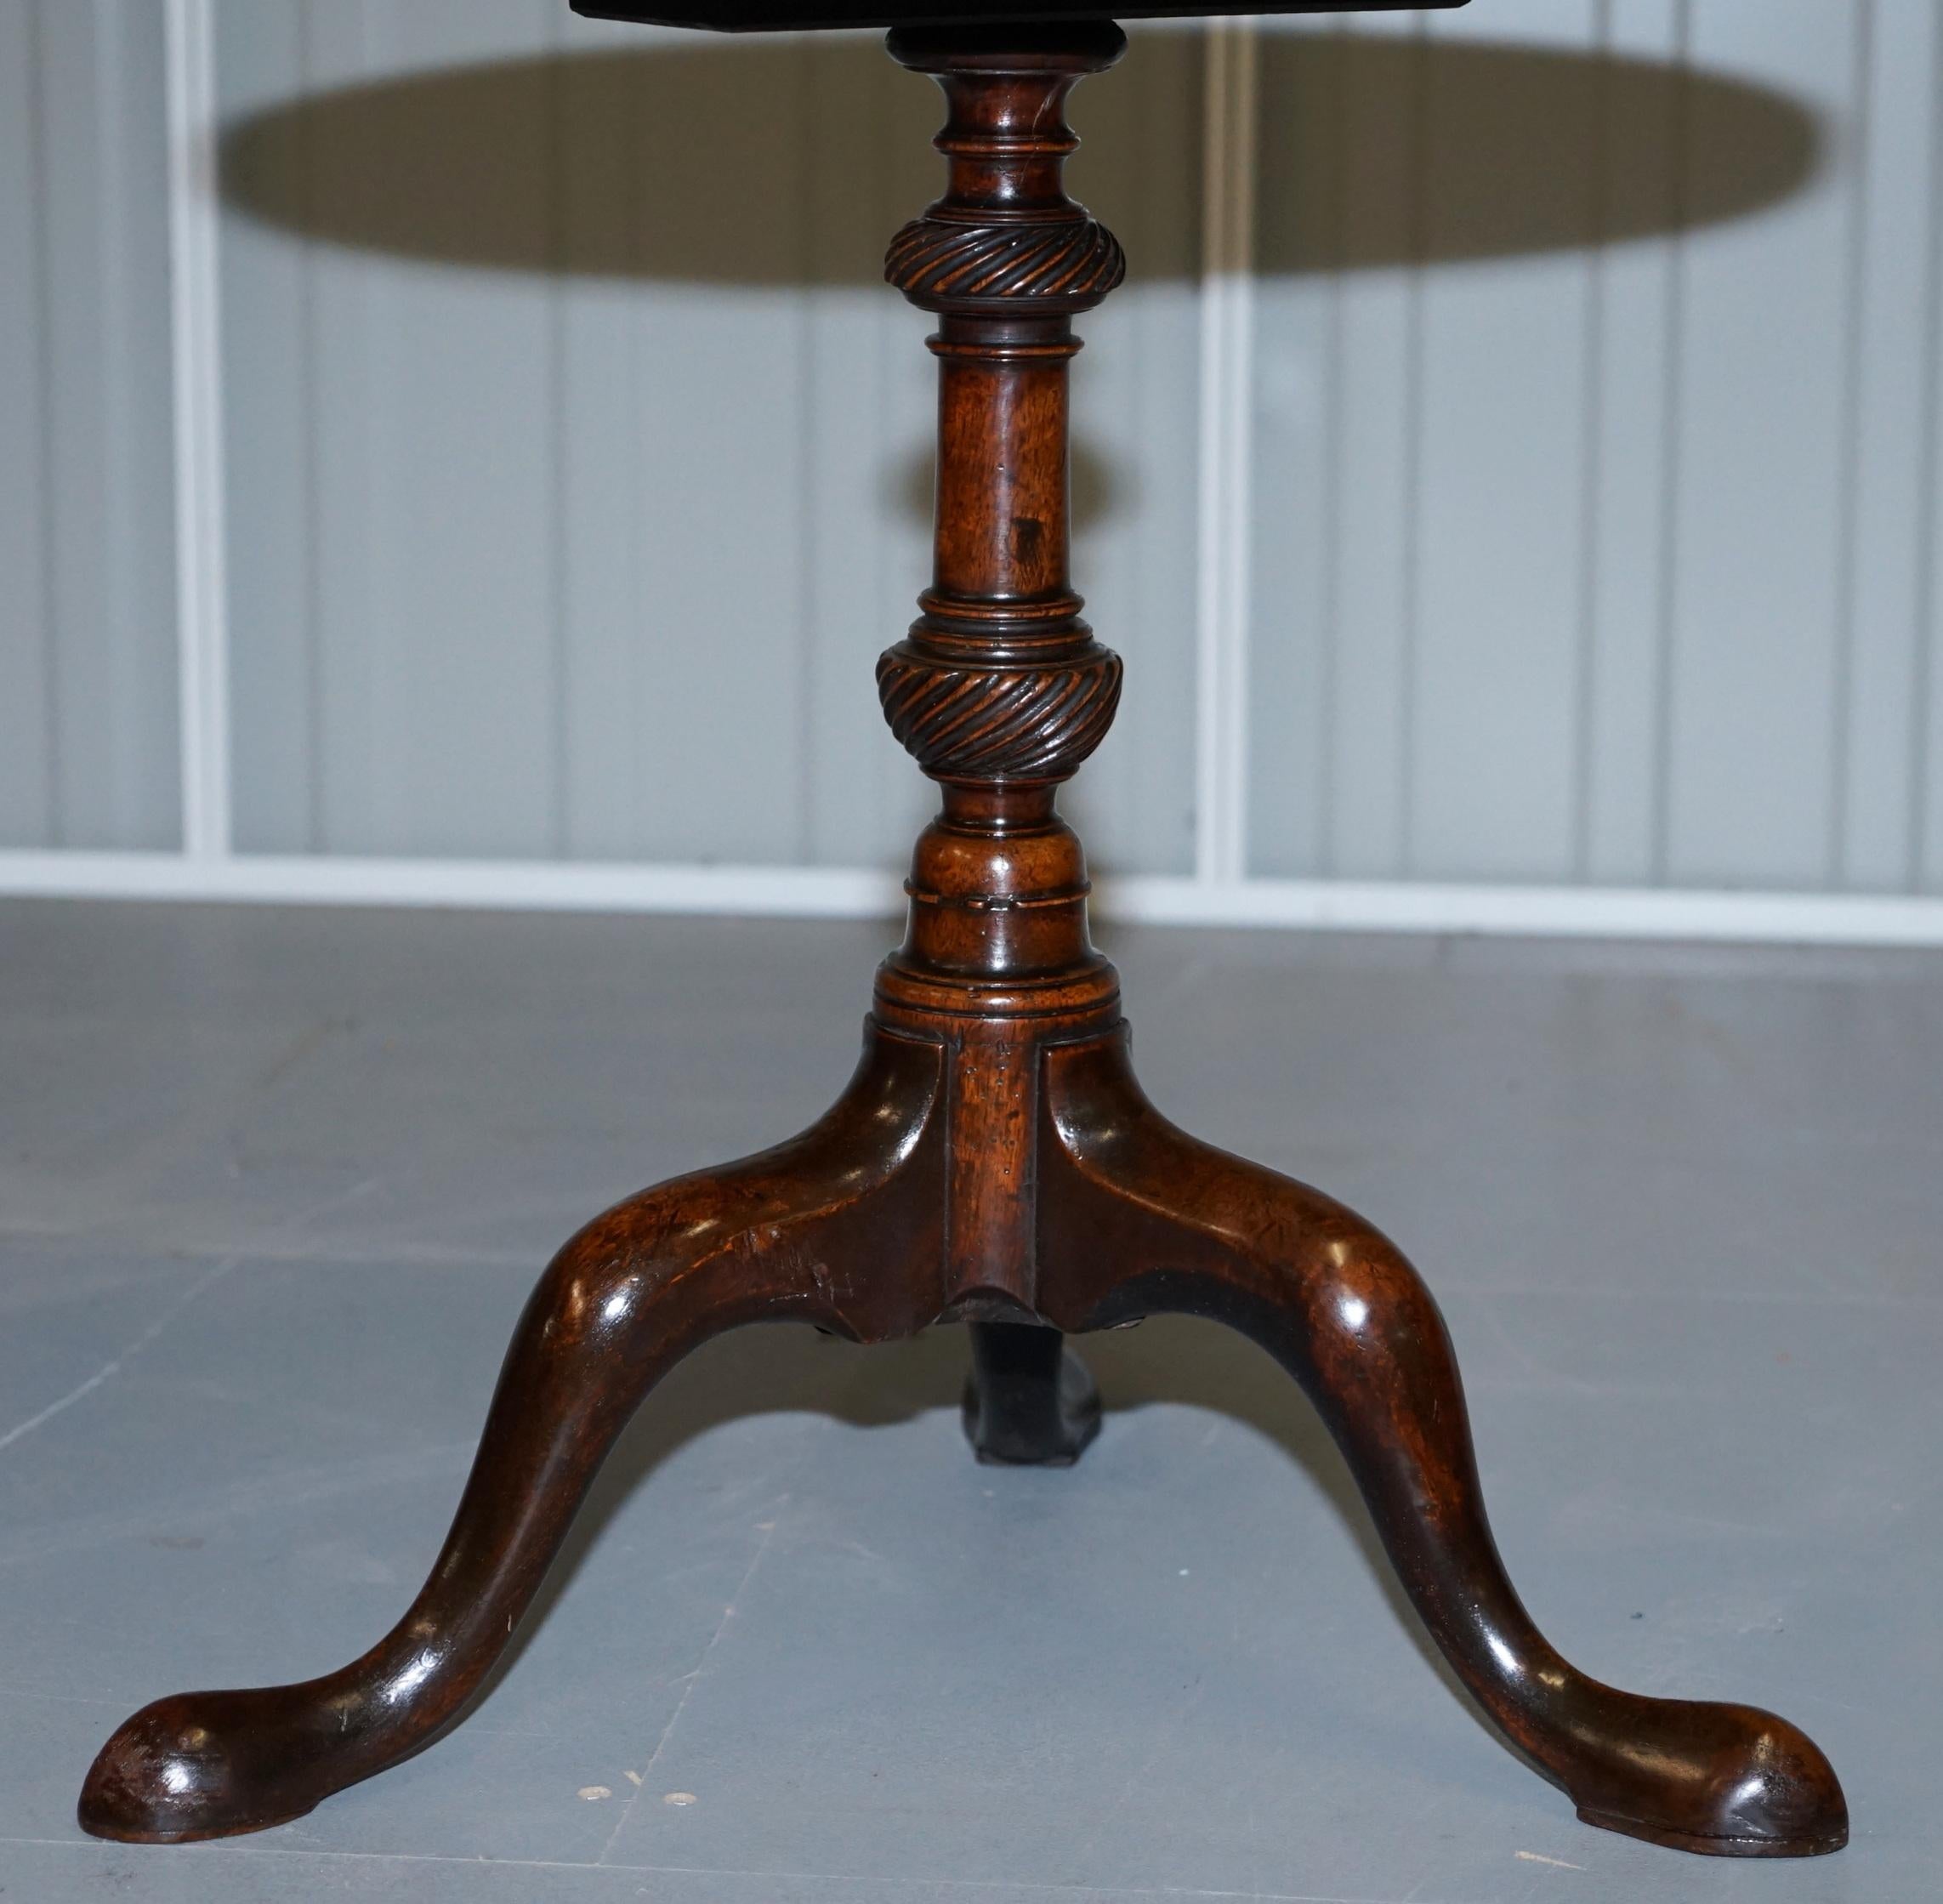 We are delighted to offer for sale this stunning late Georgian to early Victorian solid mahogany fully restored tripod table

A very good looking decorative and well made table. All hand sewn and crafted, you can see the period cut marks in the